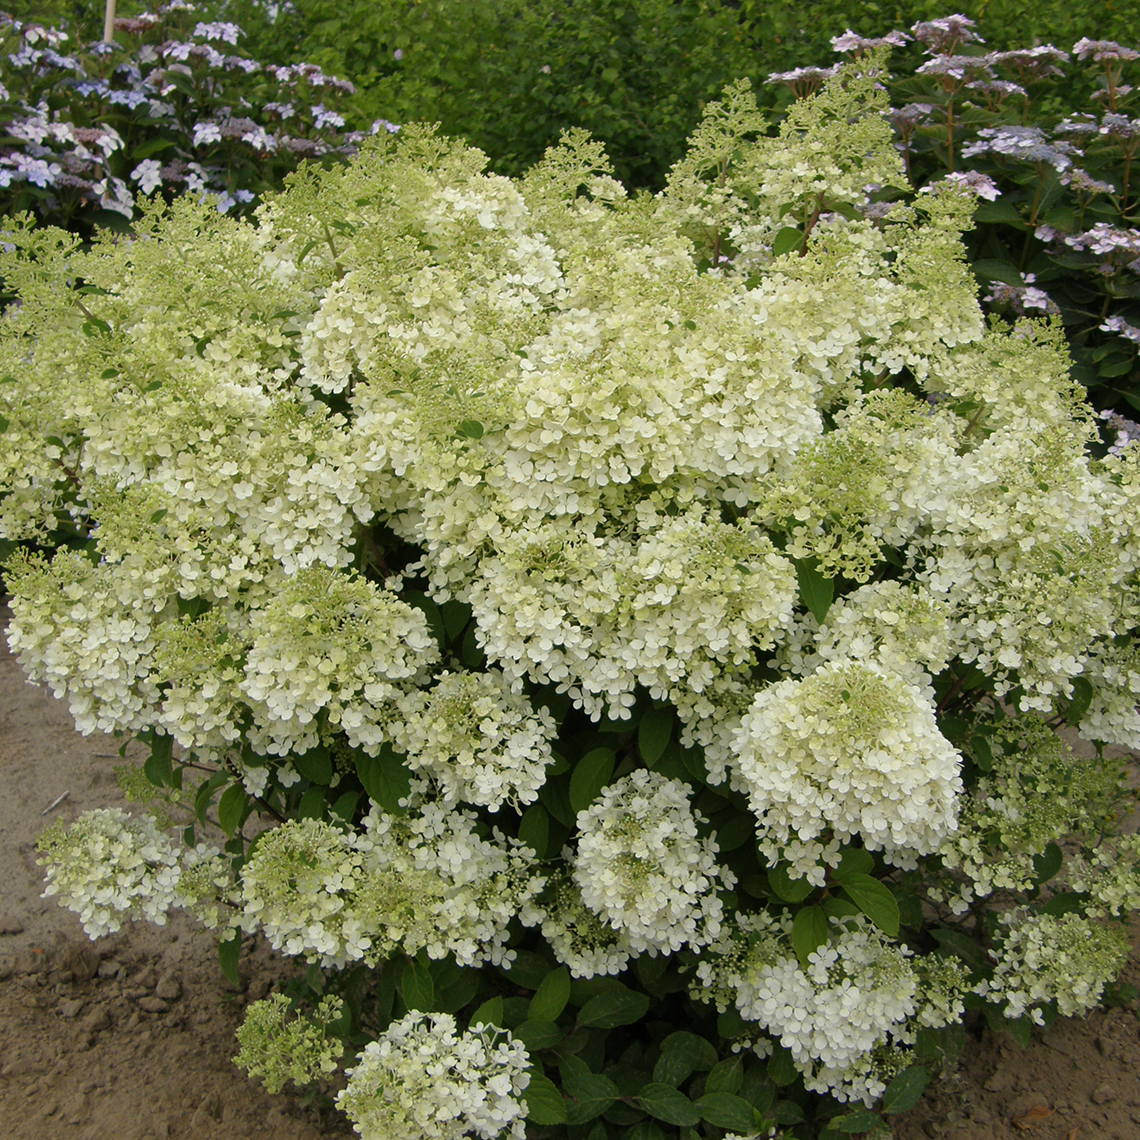 A specimen of Bobo hydrangea that is positively smothered in lacy white mophead blooms